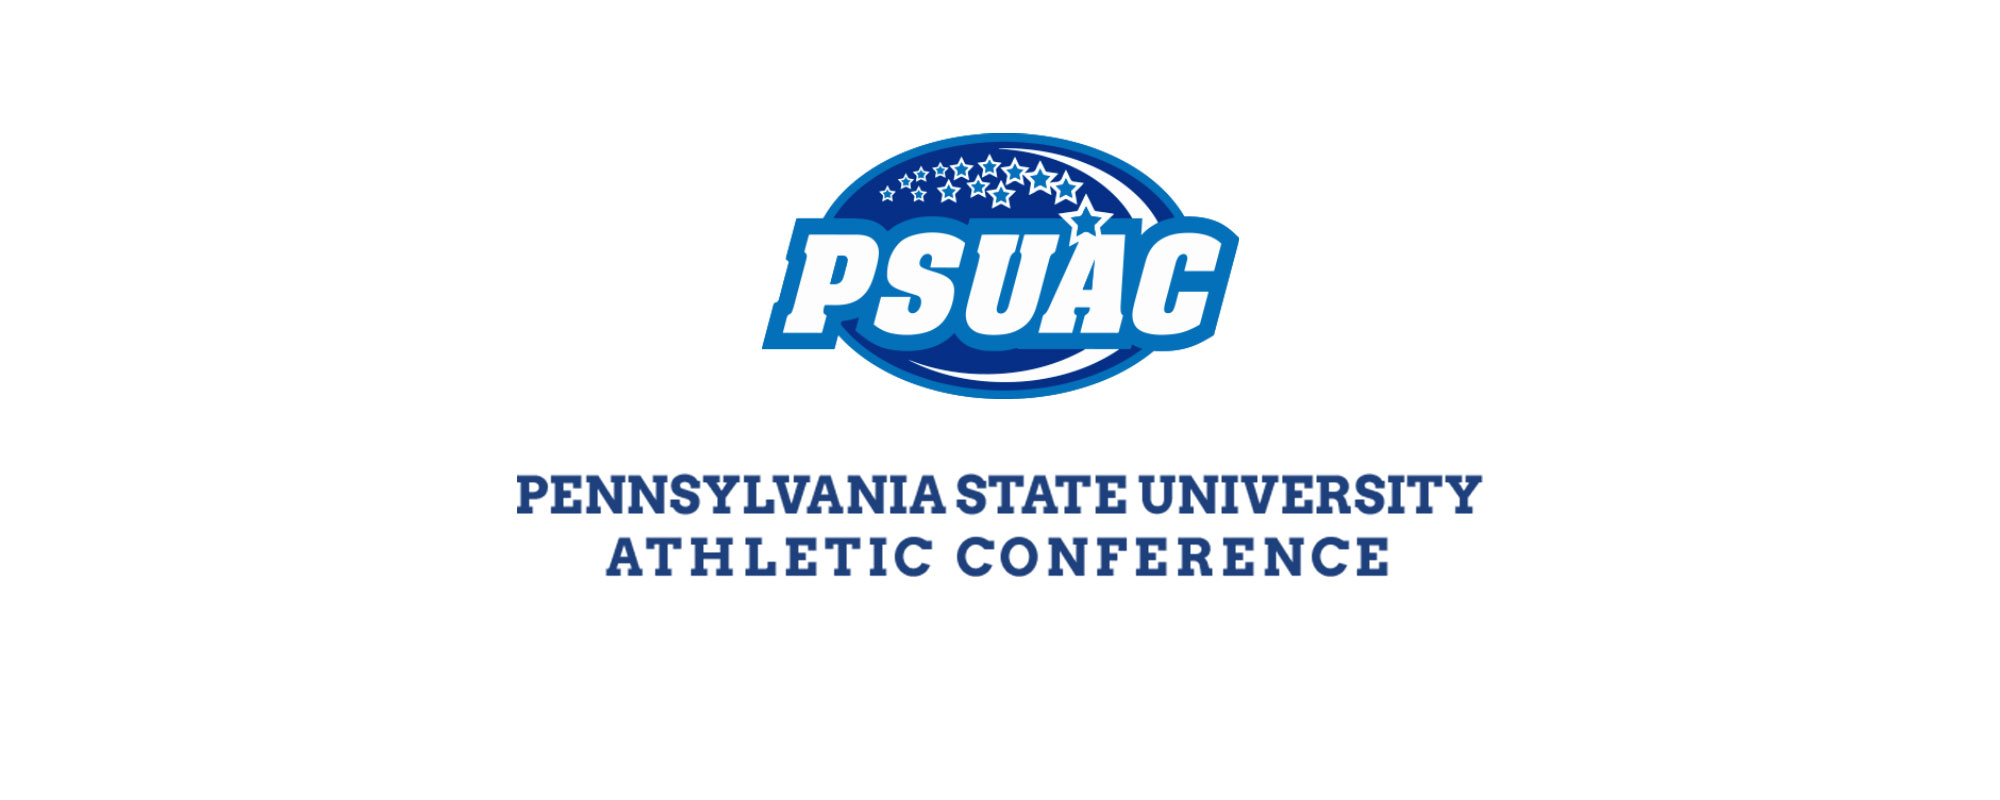 Two PSUAC Titles On the Line This Weekend as Teams Eye USCAA Bid; Fan Information Included